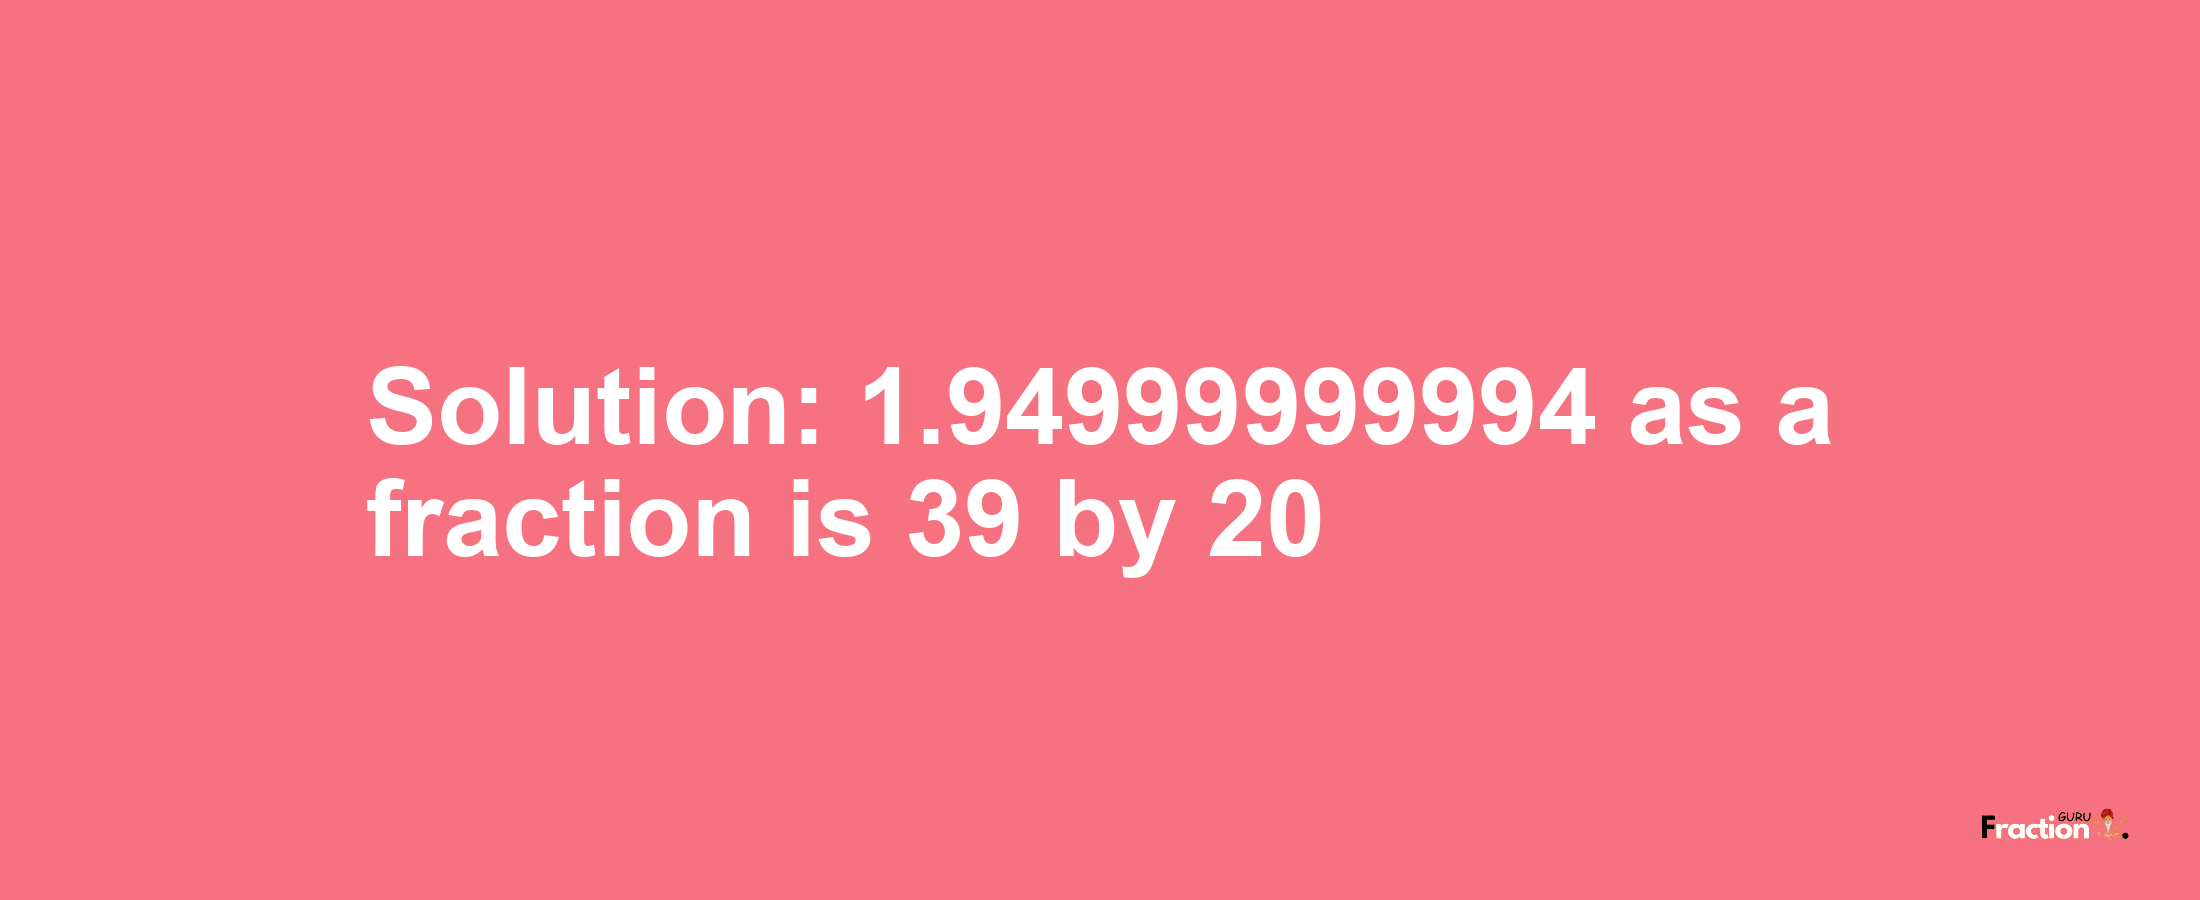 Solution:1.94999999994 as a fraction is 39/20